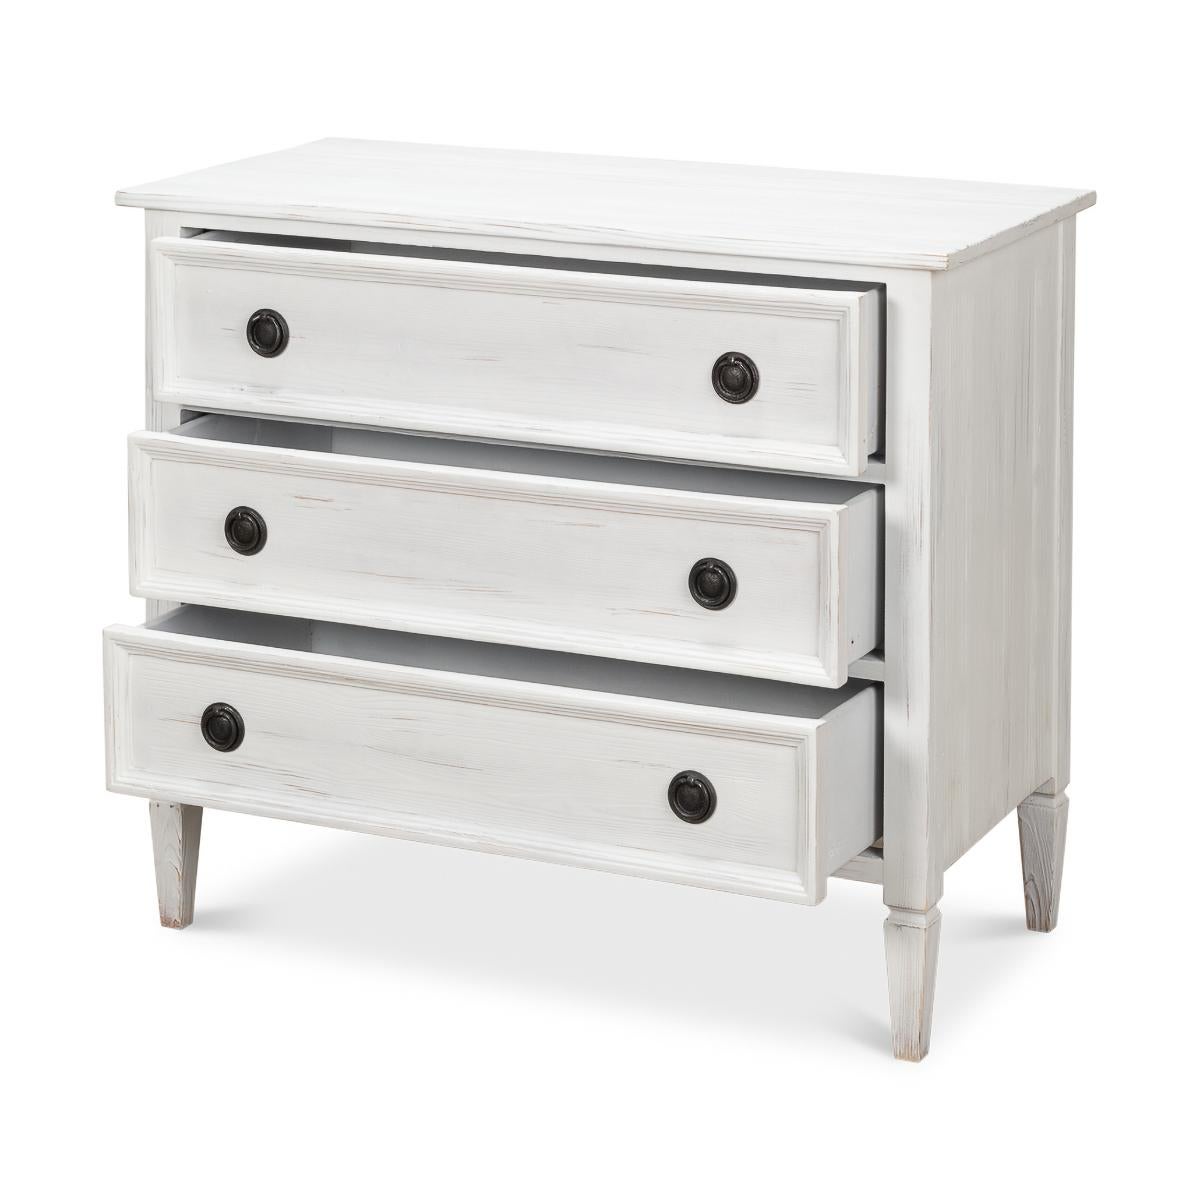 Rustic French Provincial White Painted Dresser For Sale